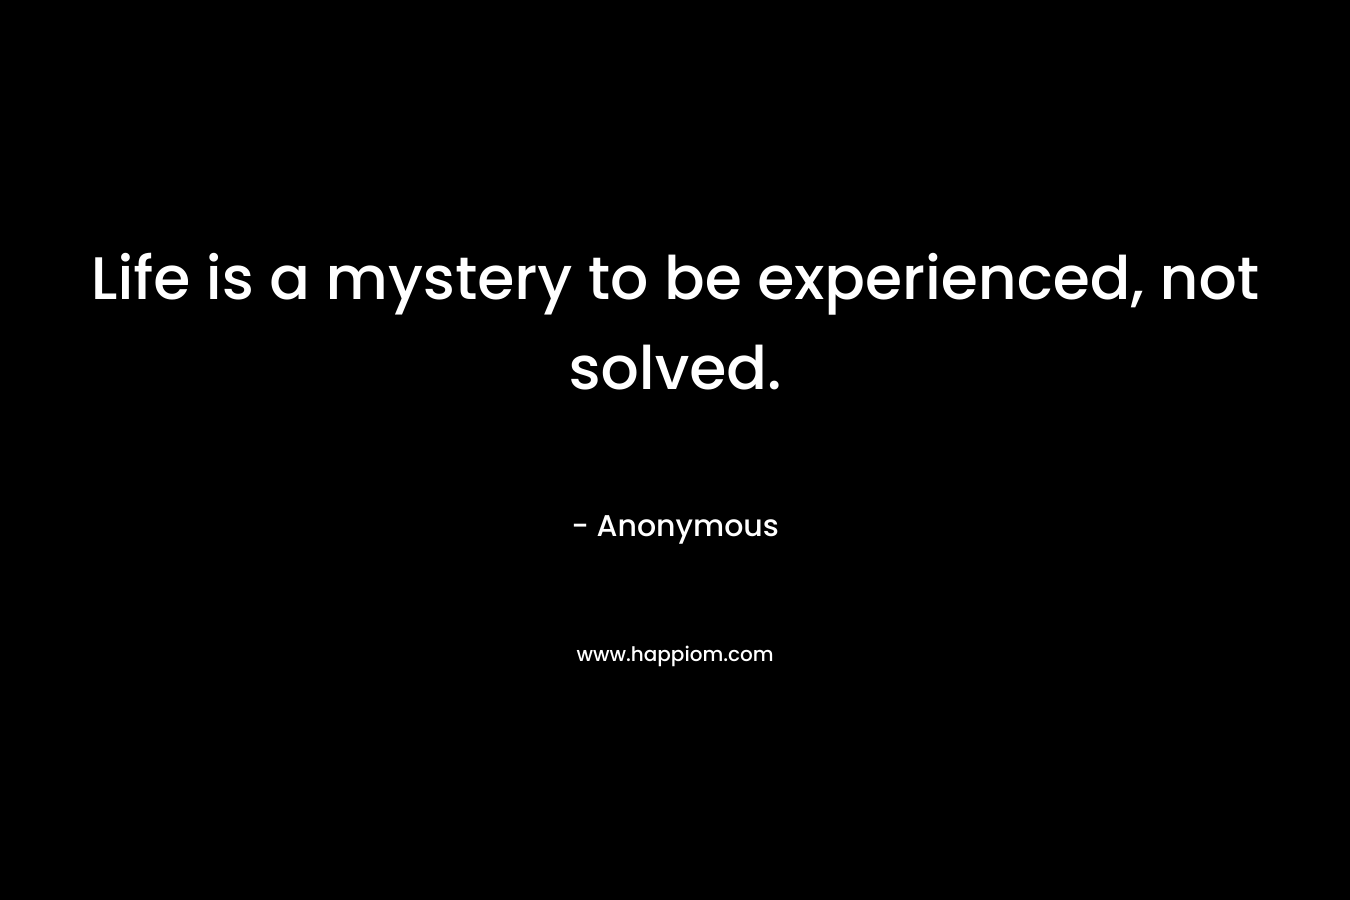 Life is a mystery to be experienced, not solved.